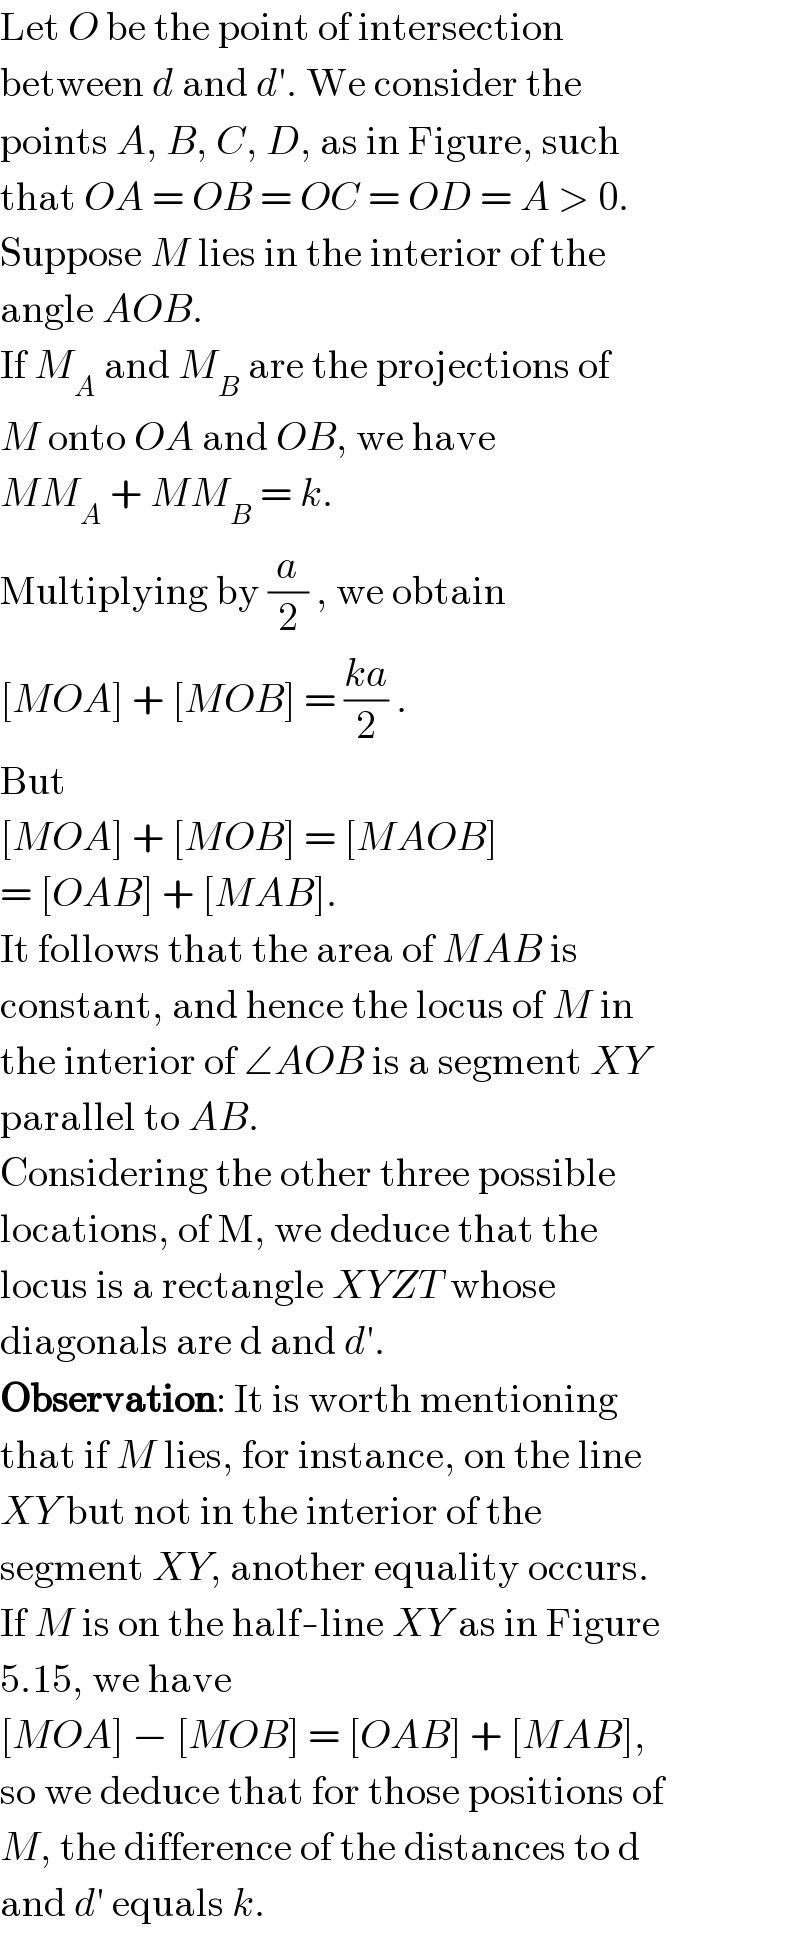 Let O be the point of intersection  between d and d′. We consider the  points A, B, C, D, as in Figure, such  that OA = OB = OC = OD = A > 0.  Suppose M lies in the interior of the  angle AOB.  If M_A  and M_B  are the projections of  M onto OA and OB, we have  MM_A  + MM_B  = k.  Multiplying by (a/2) , we obtain  [MOA] + [MOB] = ((ka)/2) .  But  [MOA] + [MOB] = [MAOB]  = [OAB] + [MAB].  It follows that the area of MAB is  constant, and hence the locus of M in  the interior of ∠AOB is a segment XY  parallel to AB.  Considering the other three possible  locations, of M, we deduce that the  locus is a rectangle XYZT whose  diagonals are d and d′.  Observation: It is worth mentioning  that if M lies, for instance, on the line  XY but not in the interior of the  segment XY, another equality occurs.  If M is on the half-line XY as in Figure  5.15, we have  [MOA] − [MOB] = [OAB] + [MAB],  so we deduce that for those positions of  M, the difference of the distances to d  and d′ equals k.  